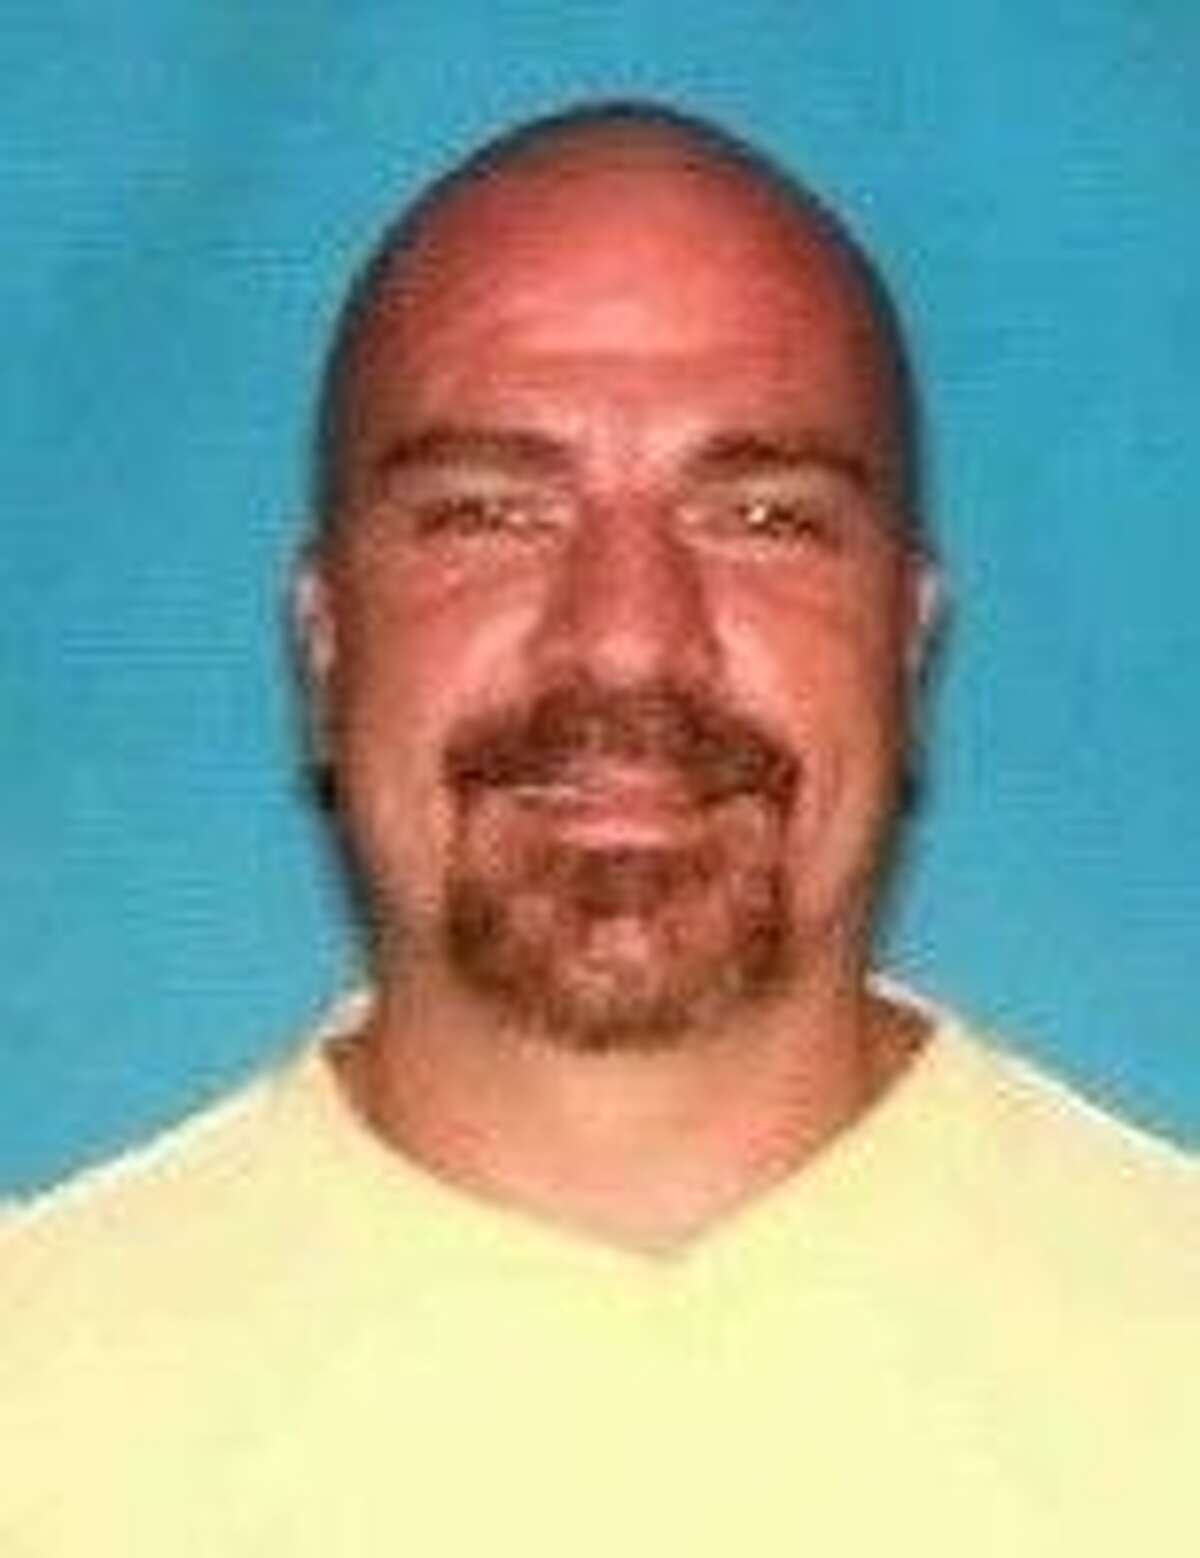 Another photo of fugitive William Joseph Greer shows him with a bald head.